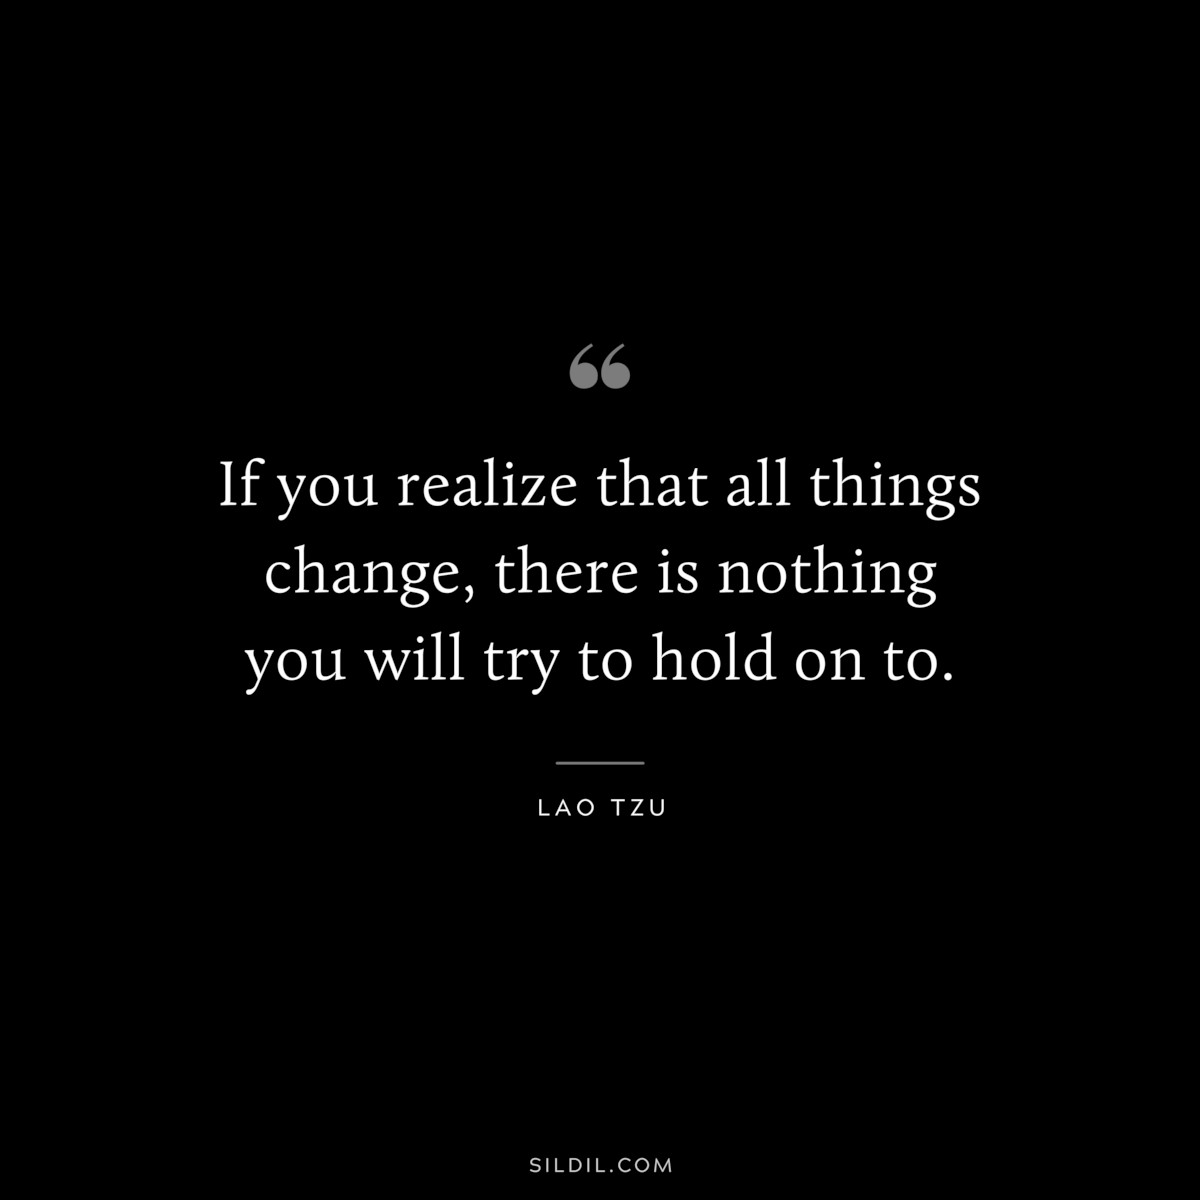 If you realize that all things change, there is nothing you will try to hold on to. ― Lao Tzu